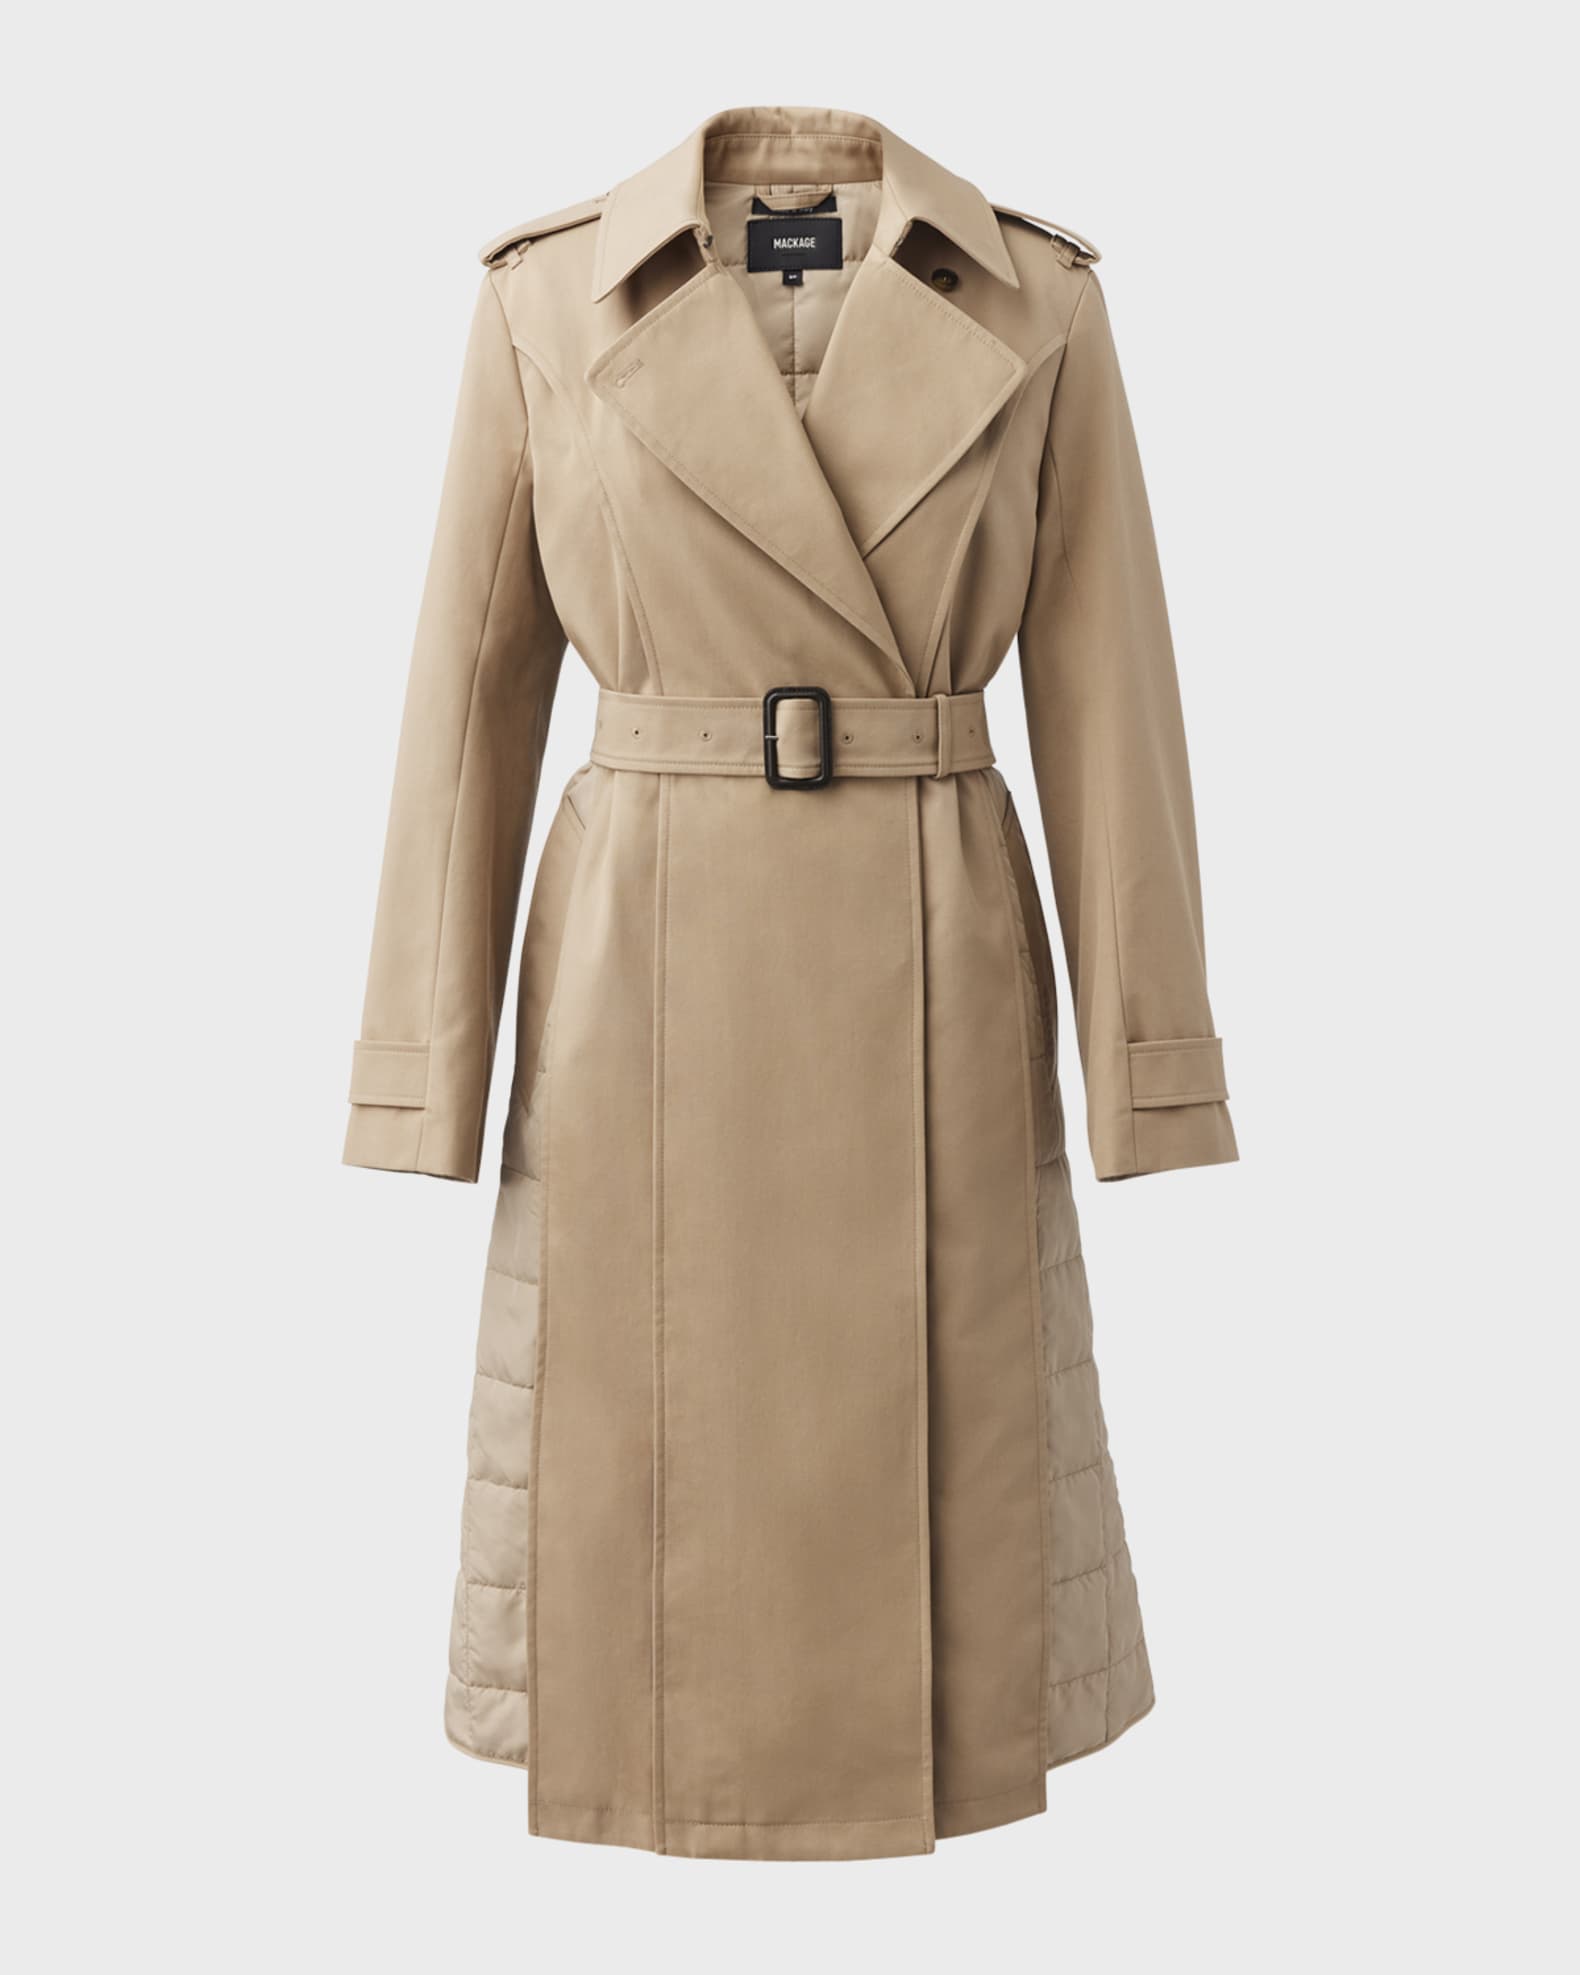 Mackage Astrid Mixed Media Belted Trench Coat | Neiman Marcus